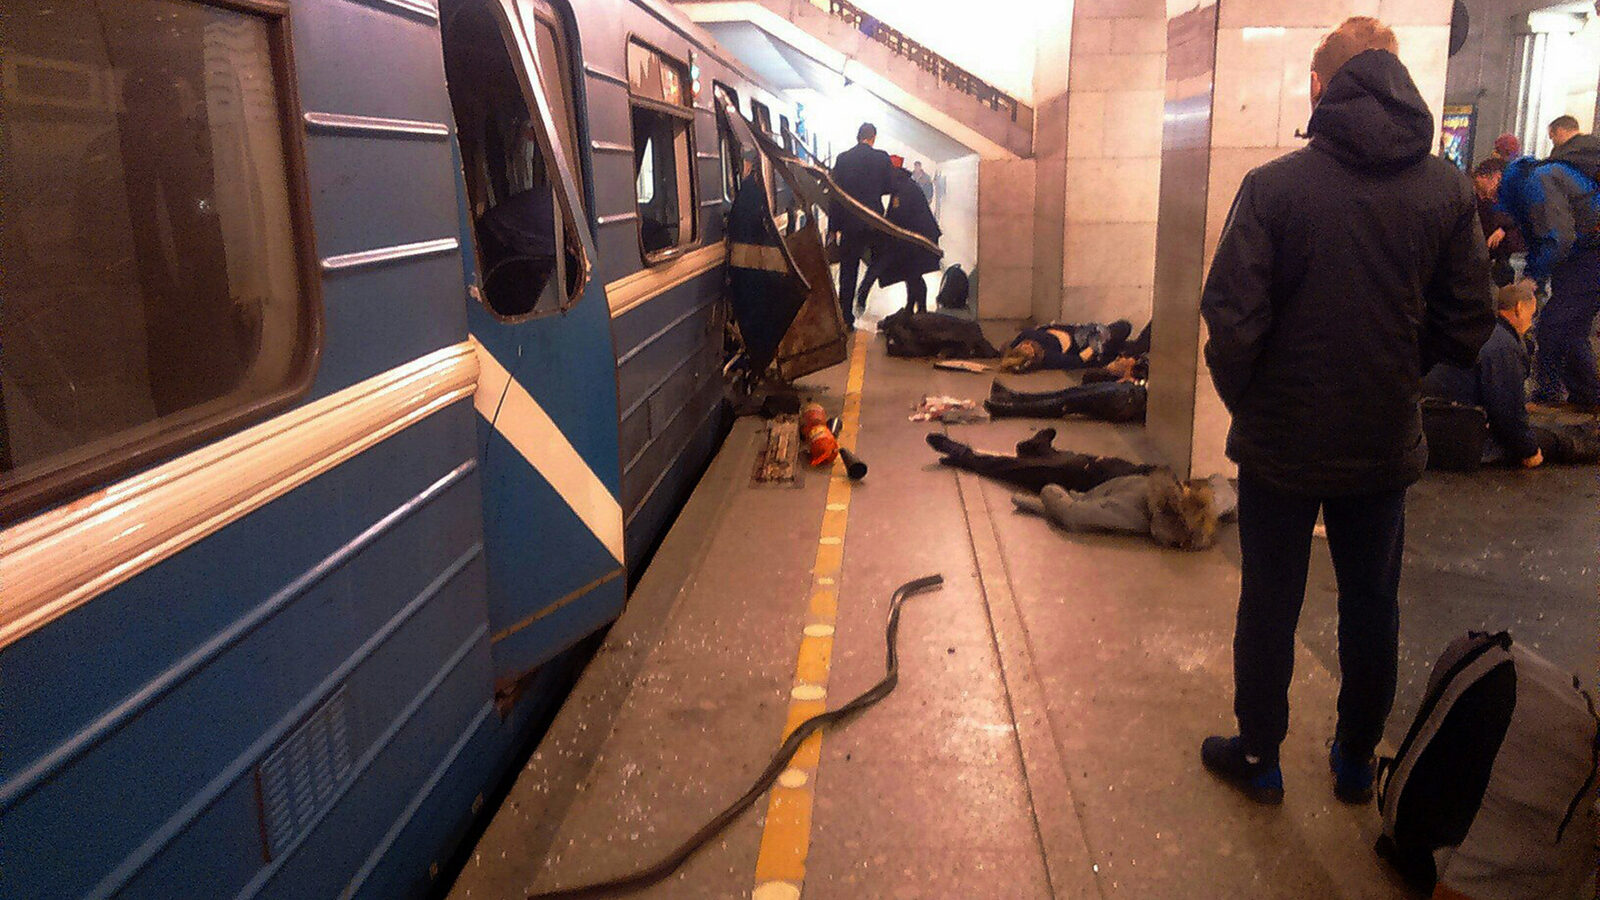 Blast victims lie near a subway train hit by a explosion at the Tekhnologichesky Institut subway station in St.Petersburg, Russia, Monday, April 3, 2017. The subway in the Russian city of St. Petersburg is reporting that several people have been injured in an explosion on a subway train. (AP Photo)